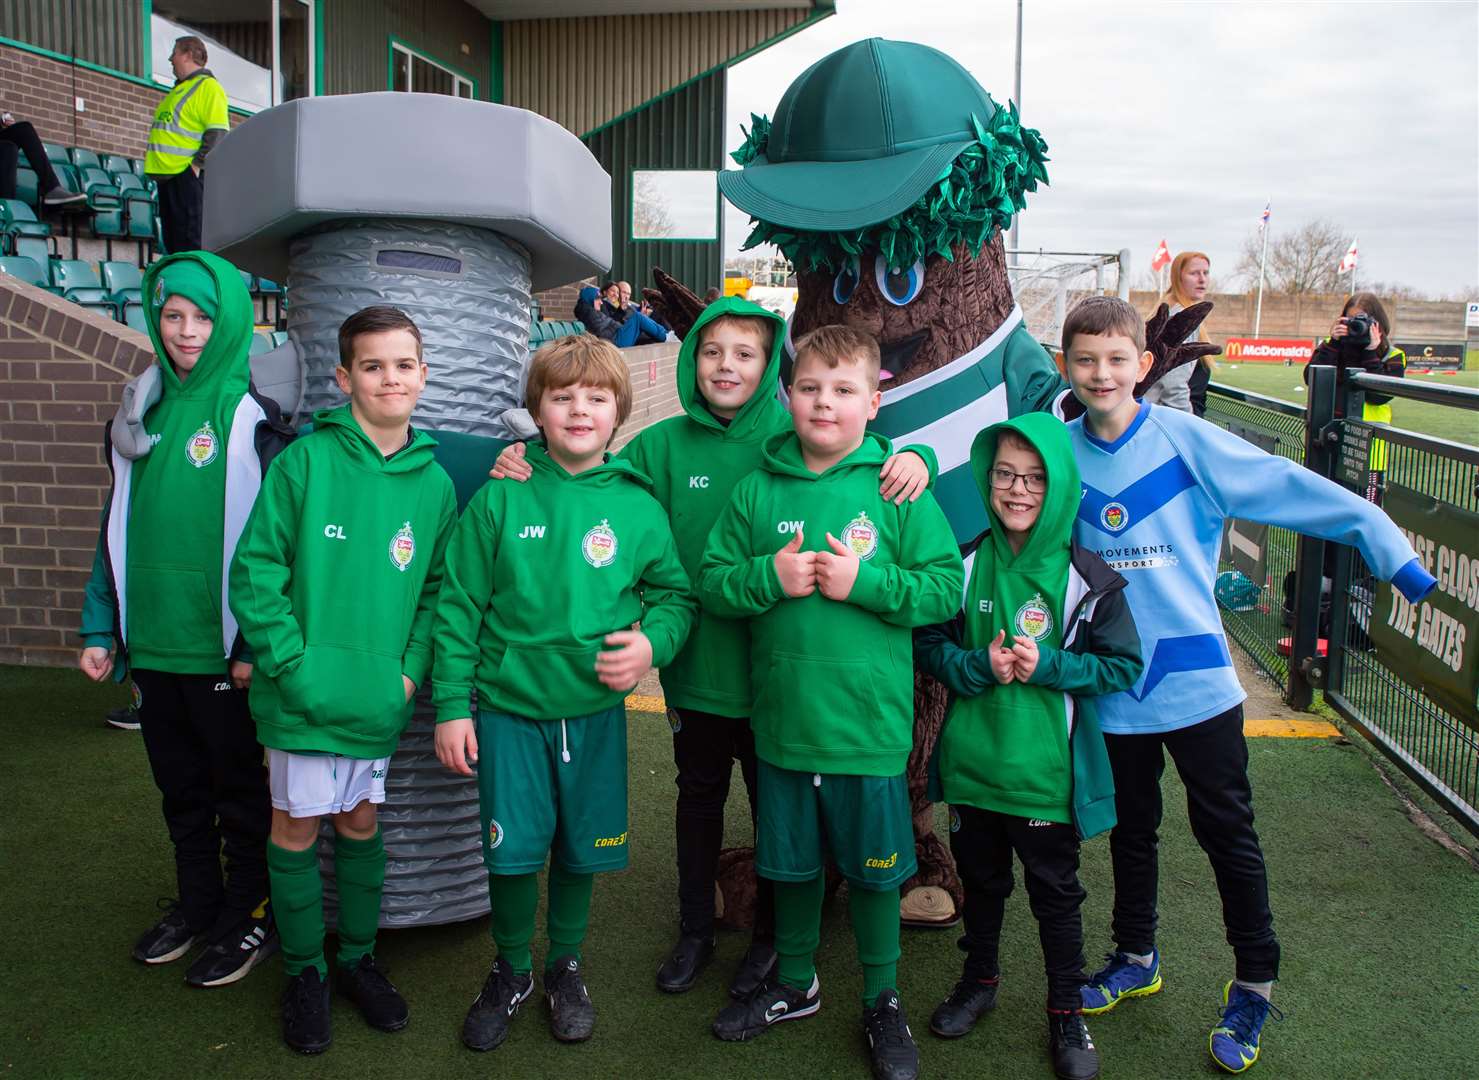 Ashford disability players were mascots for the first team's game against Chatham last month. Picture: Ian Scammell